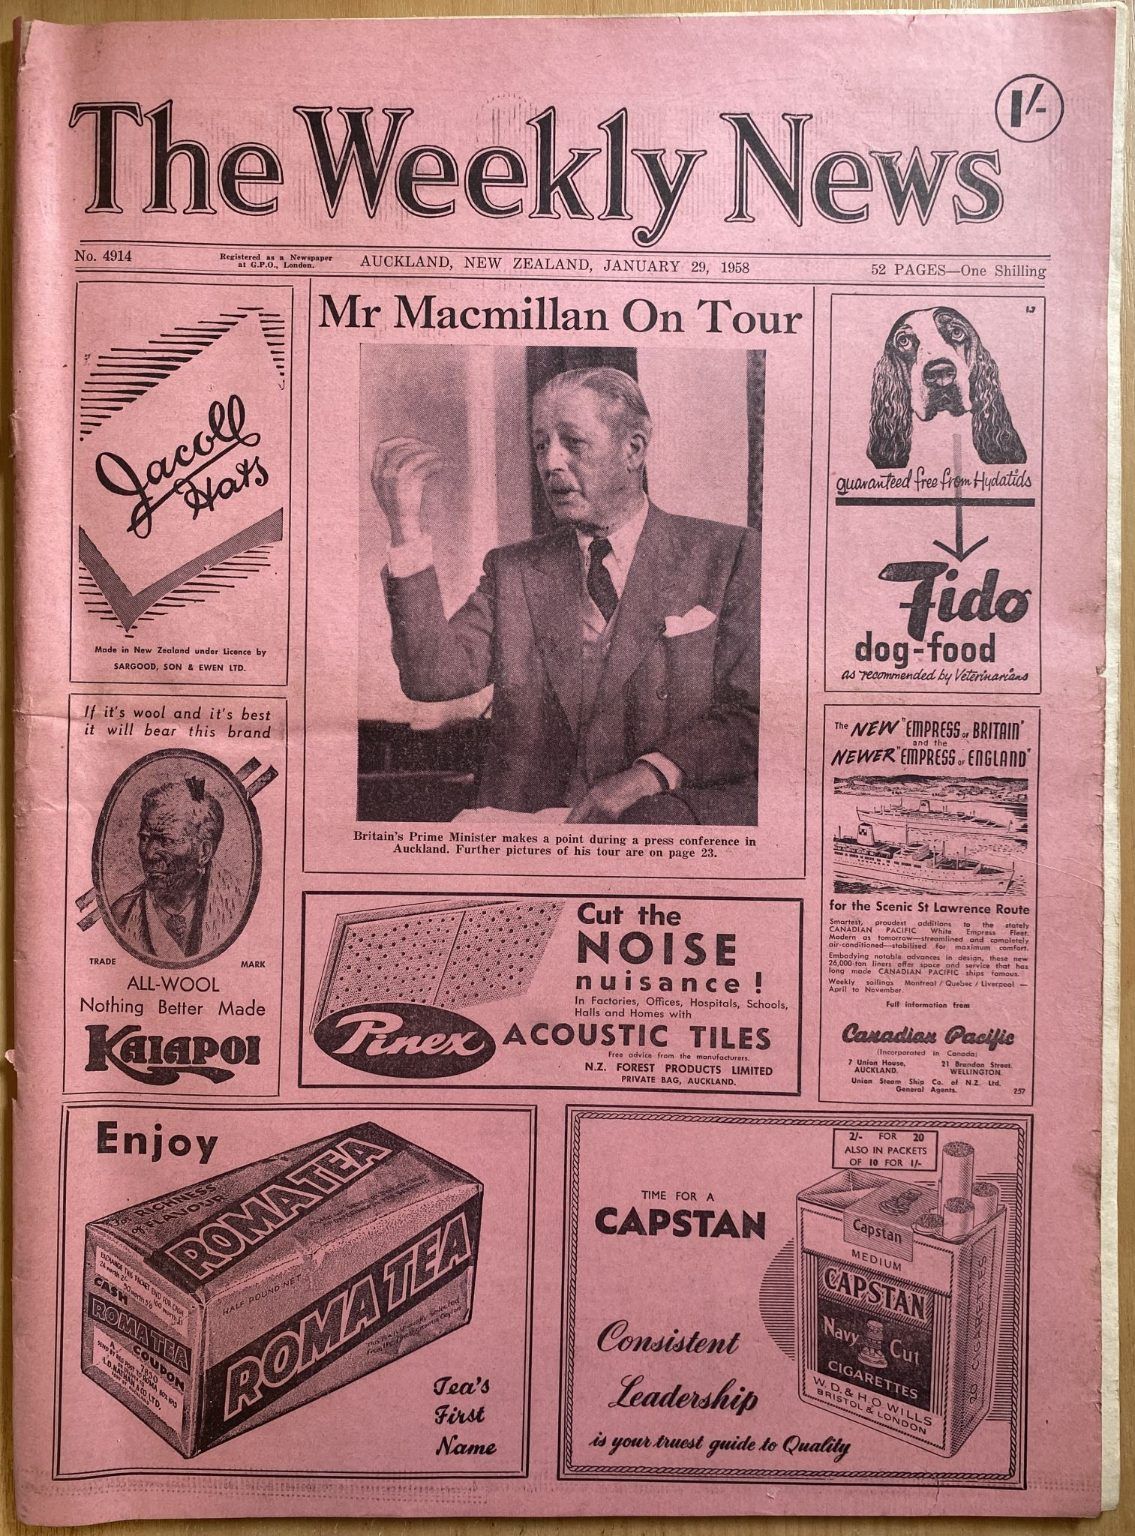 OLD NEWSPAPER: The Weekly News, No. 4914, 29 January 1958